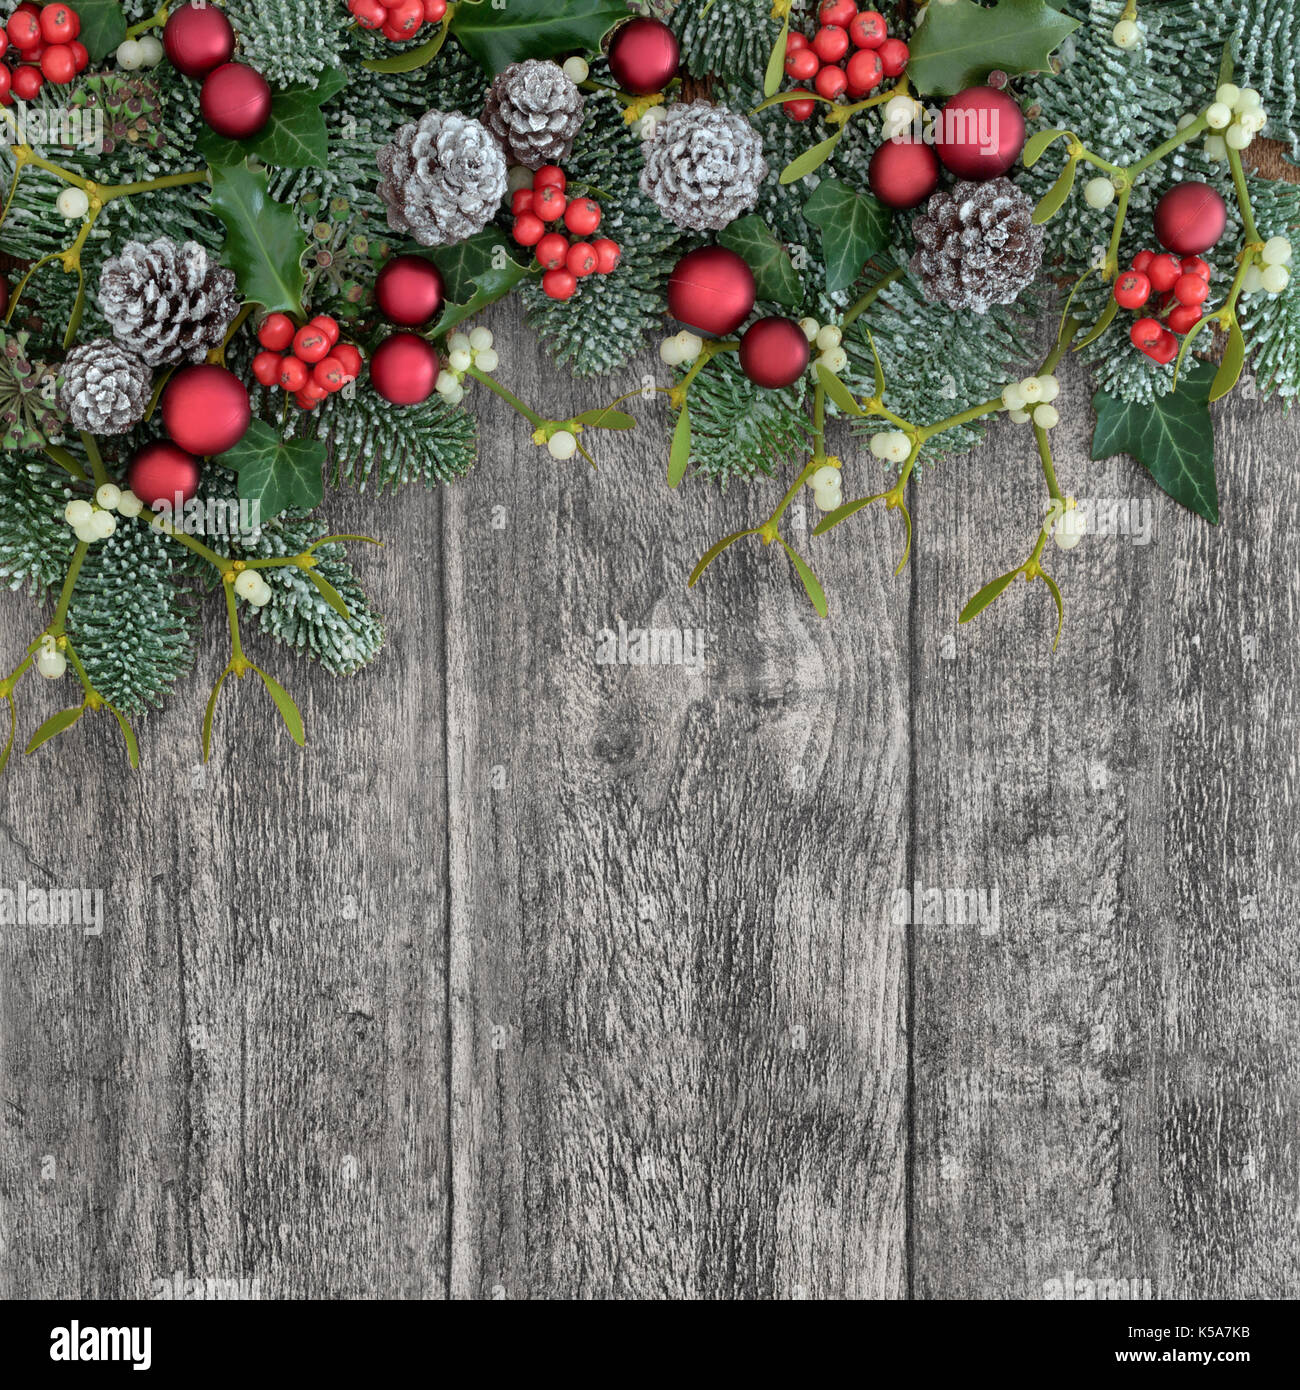 Christmas Border. Christmas and winter background border with fir, holly,  ivy, m , #AFF, #border, #fir, #holl…